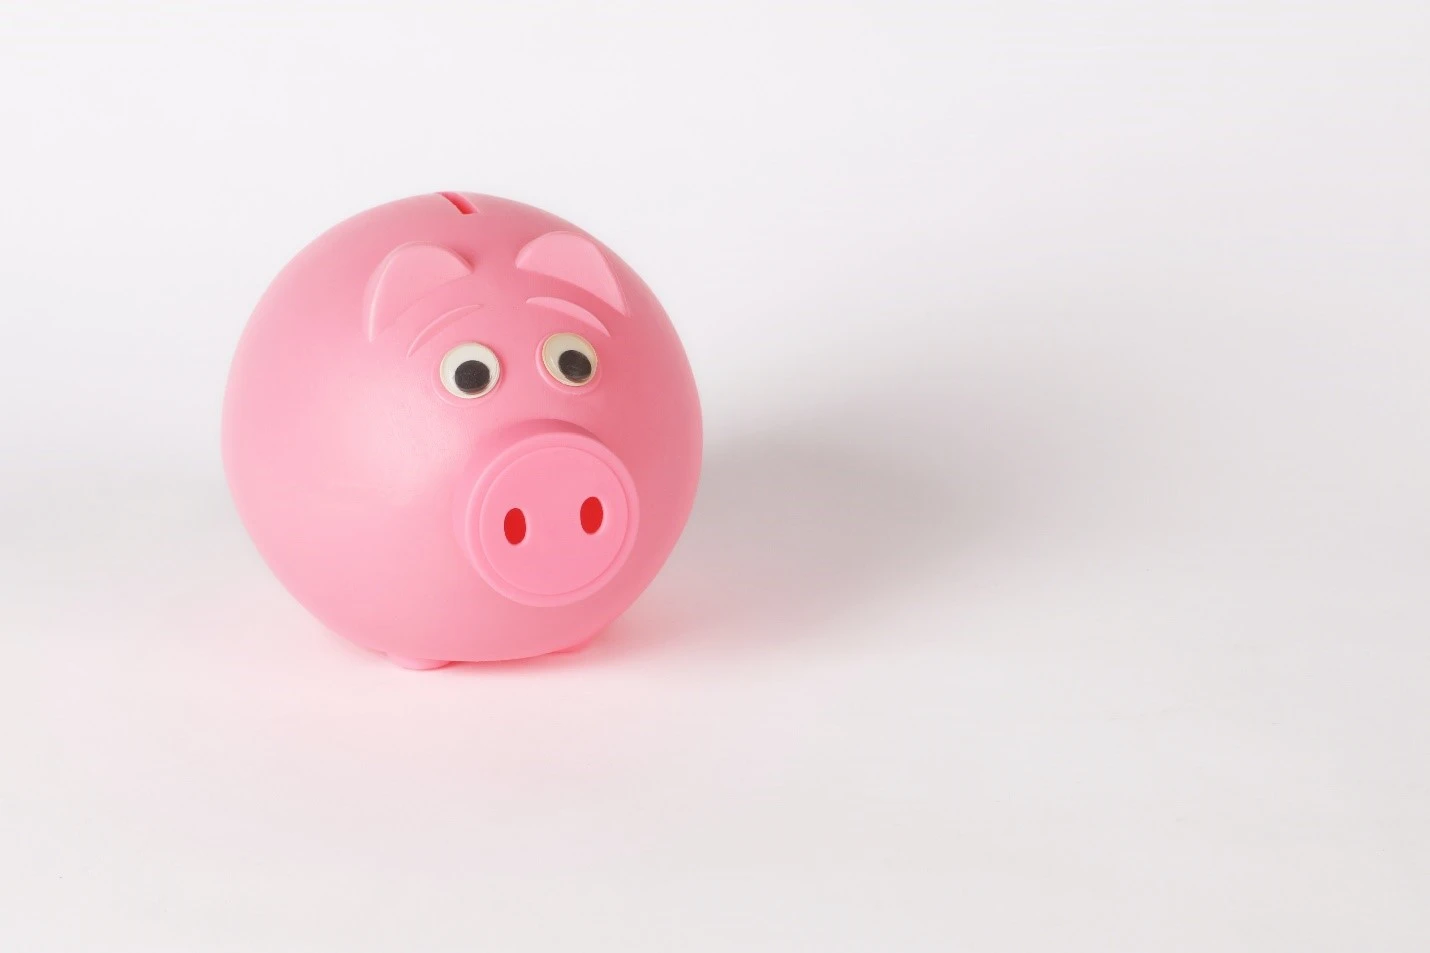 Pink piggy bank in front of white background.